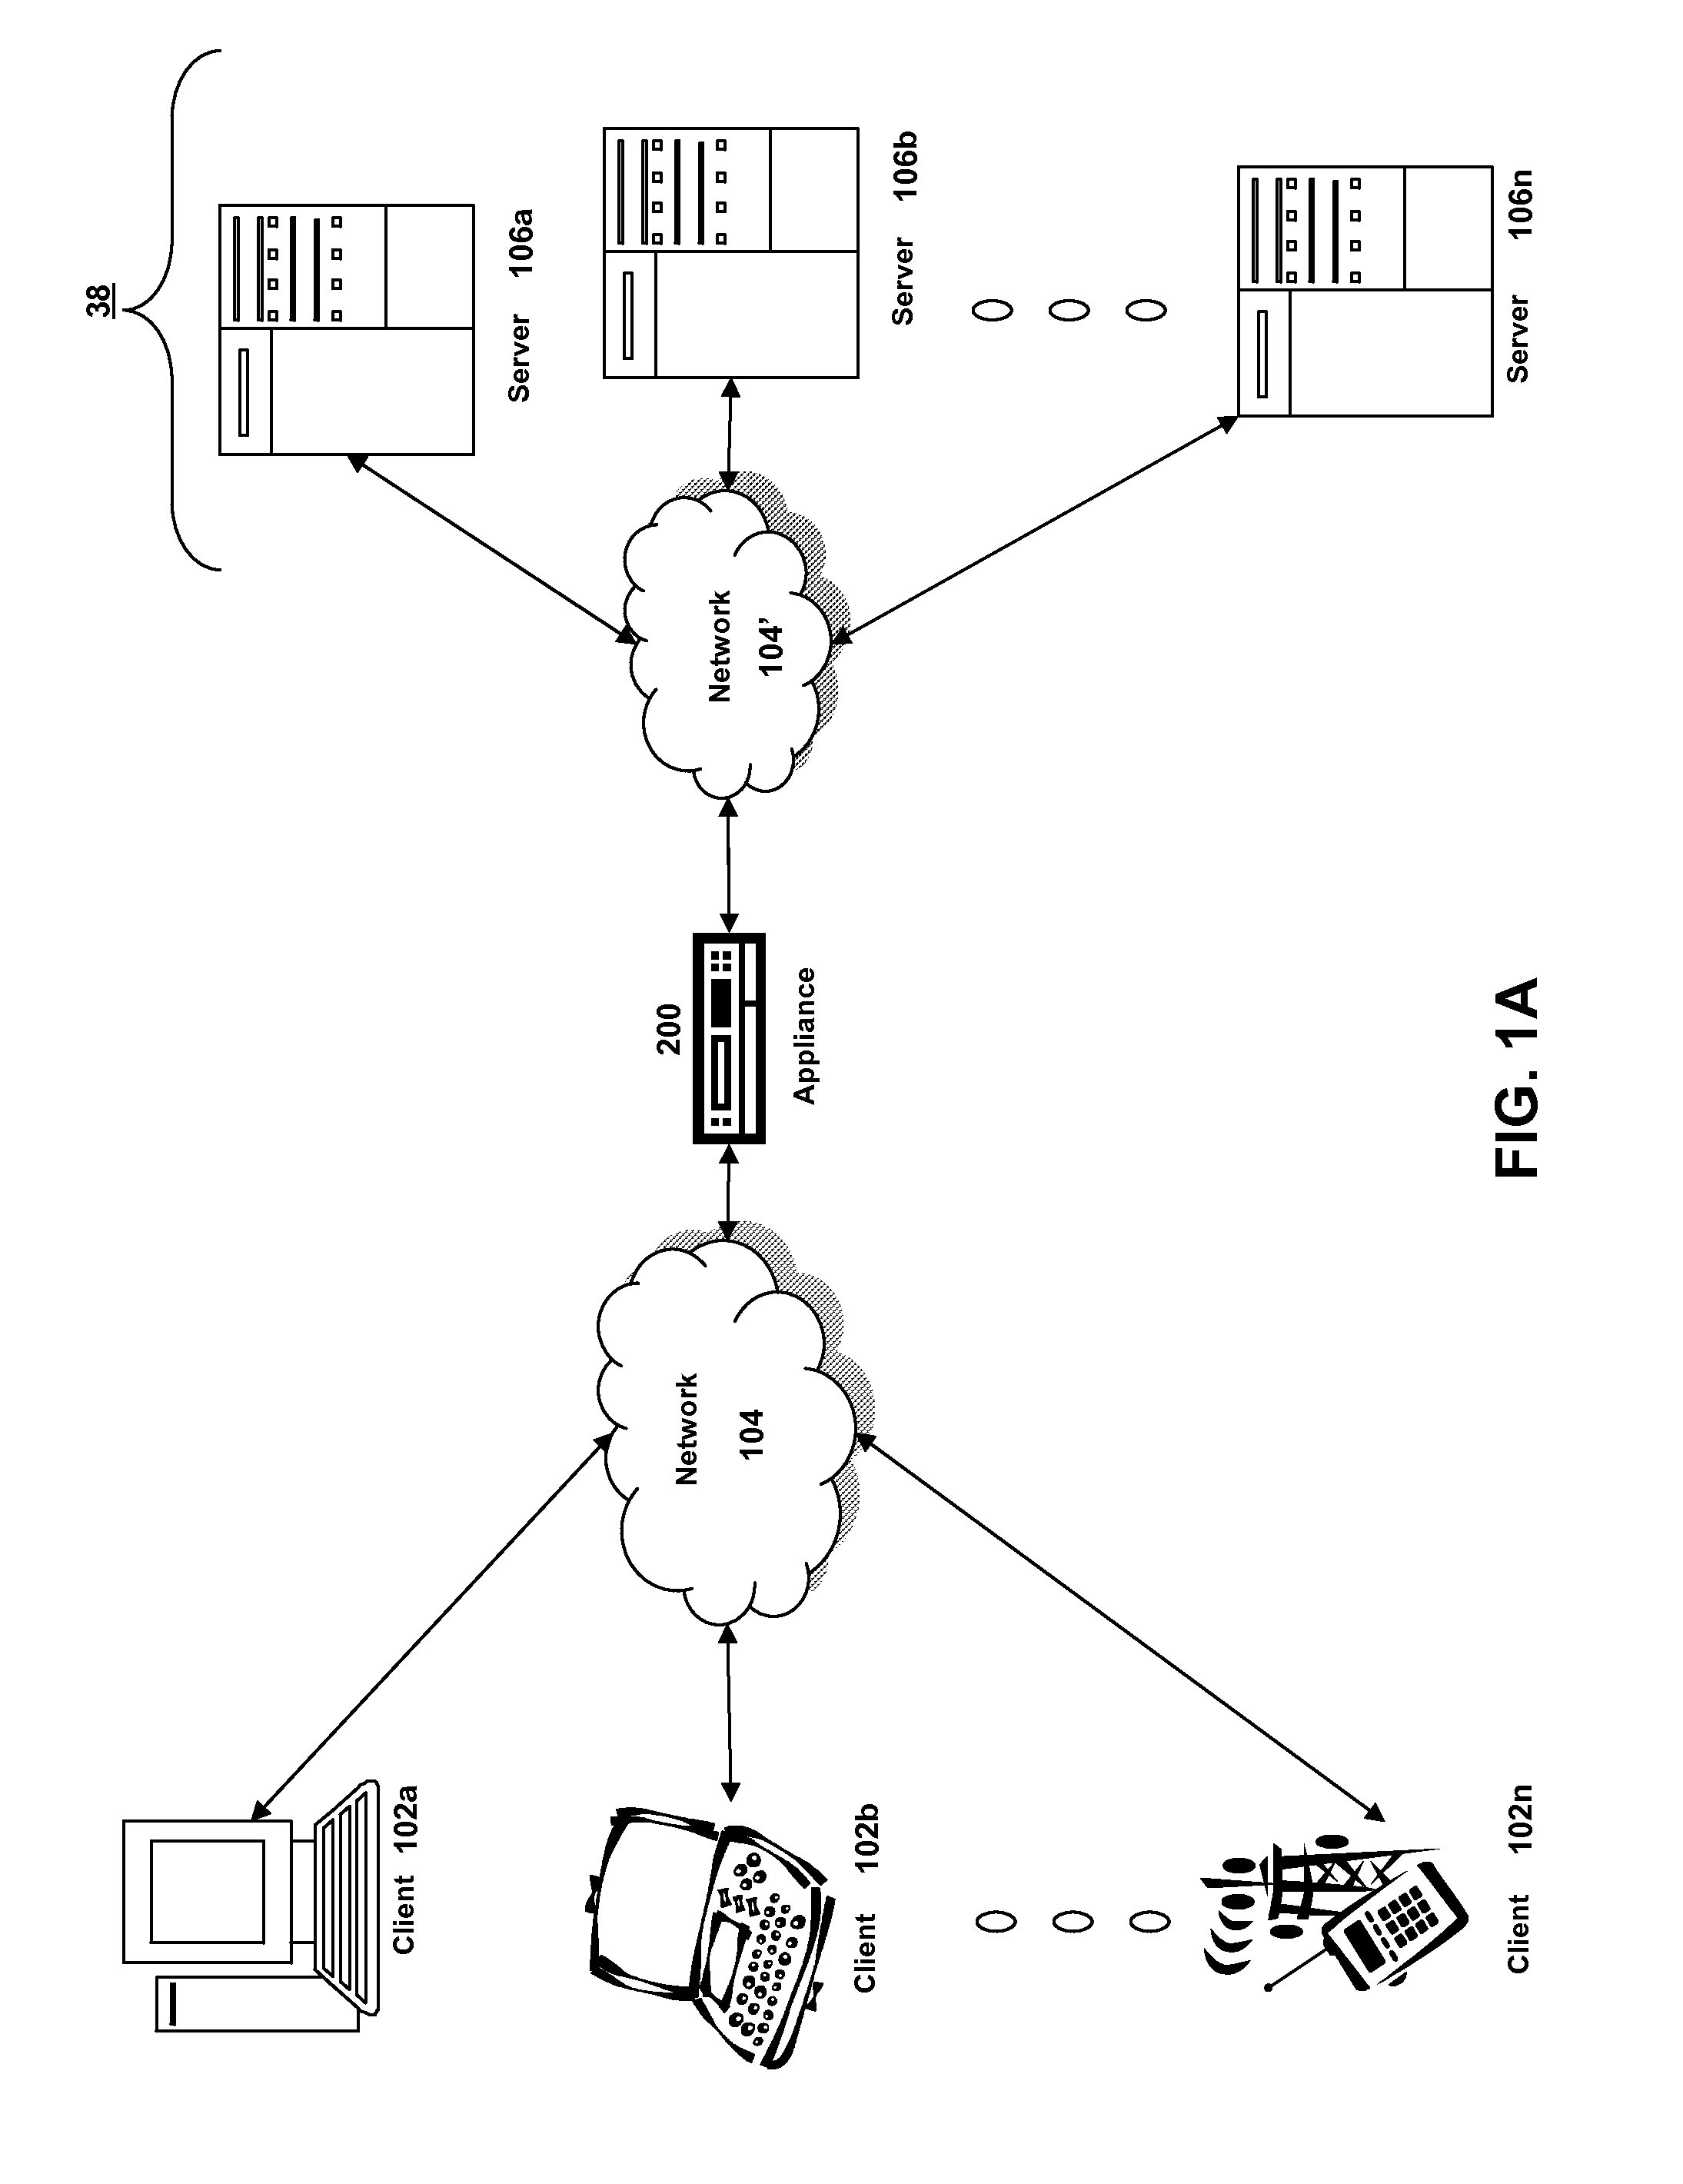 Systems and methods for adaptive application provisioning